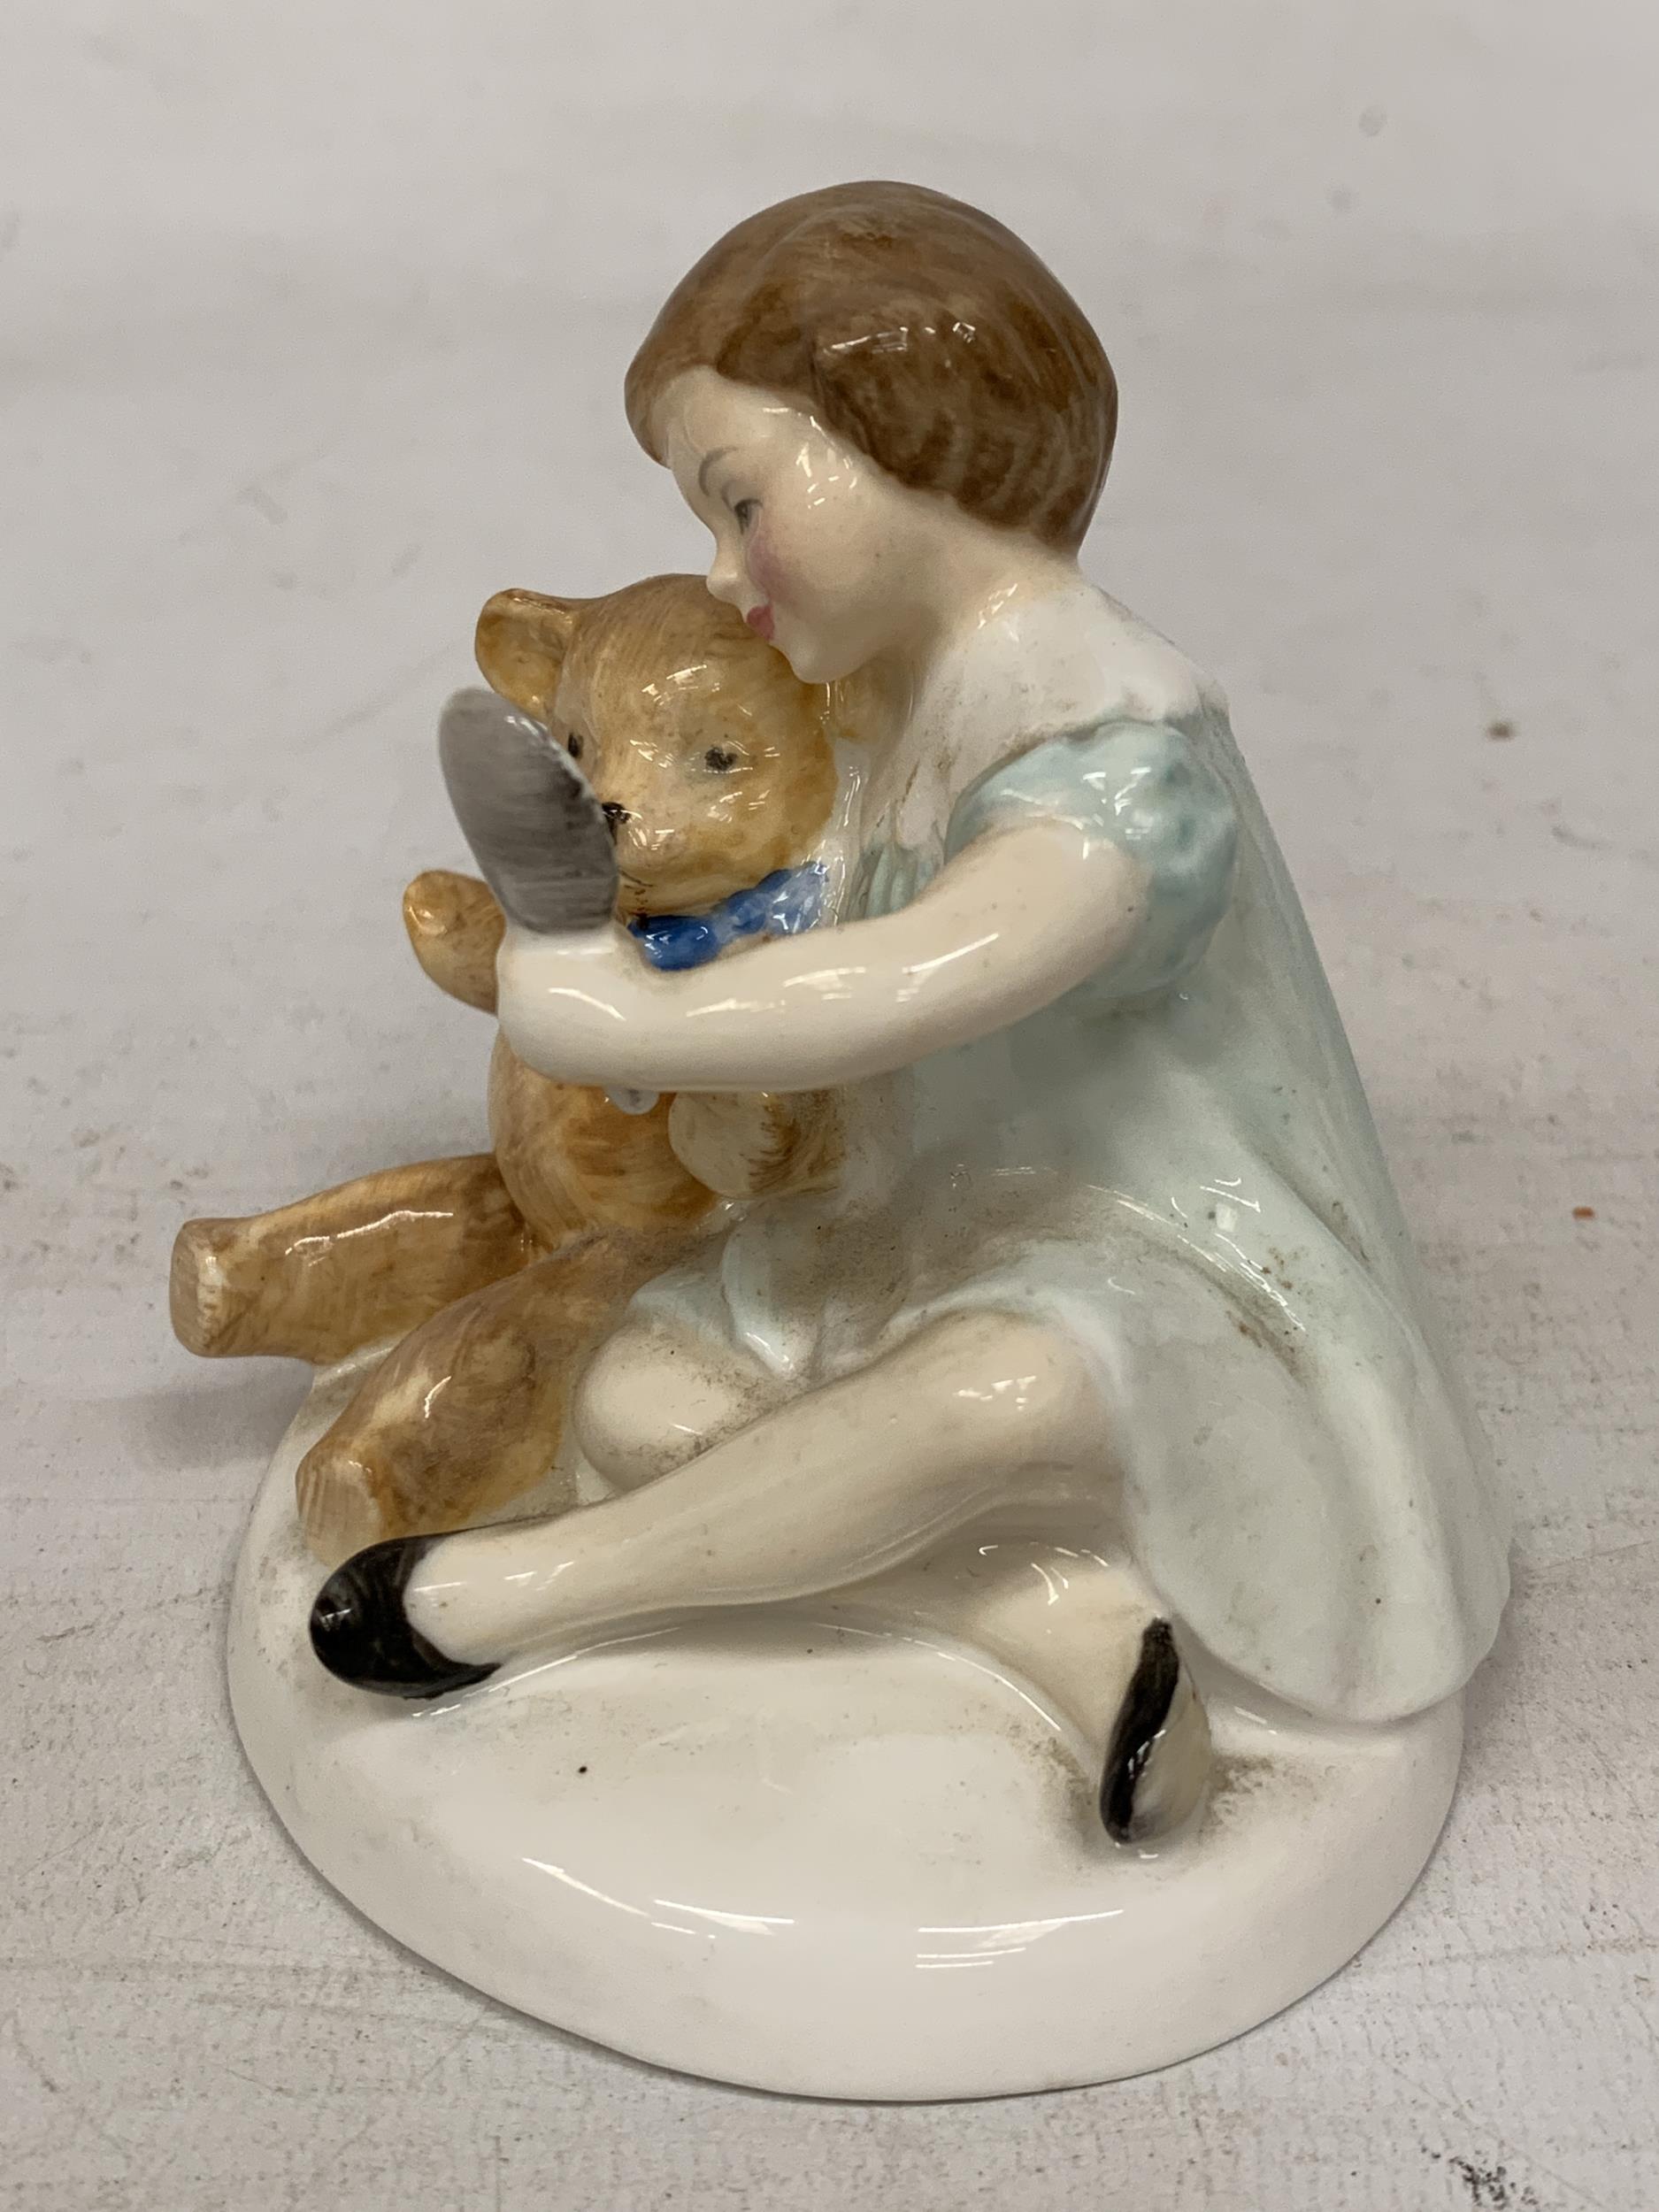 A ROYAL DOULTON FIGURE "MY TEDDY" HN 2177 - Image 4 of 5